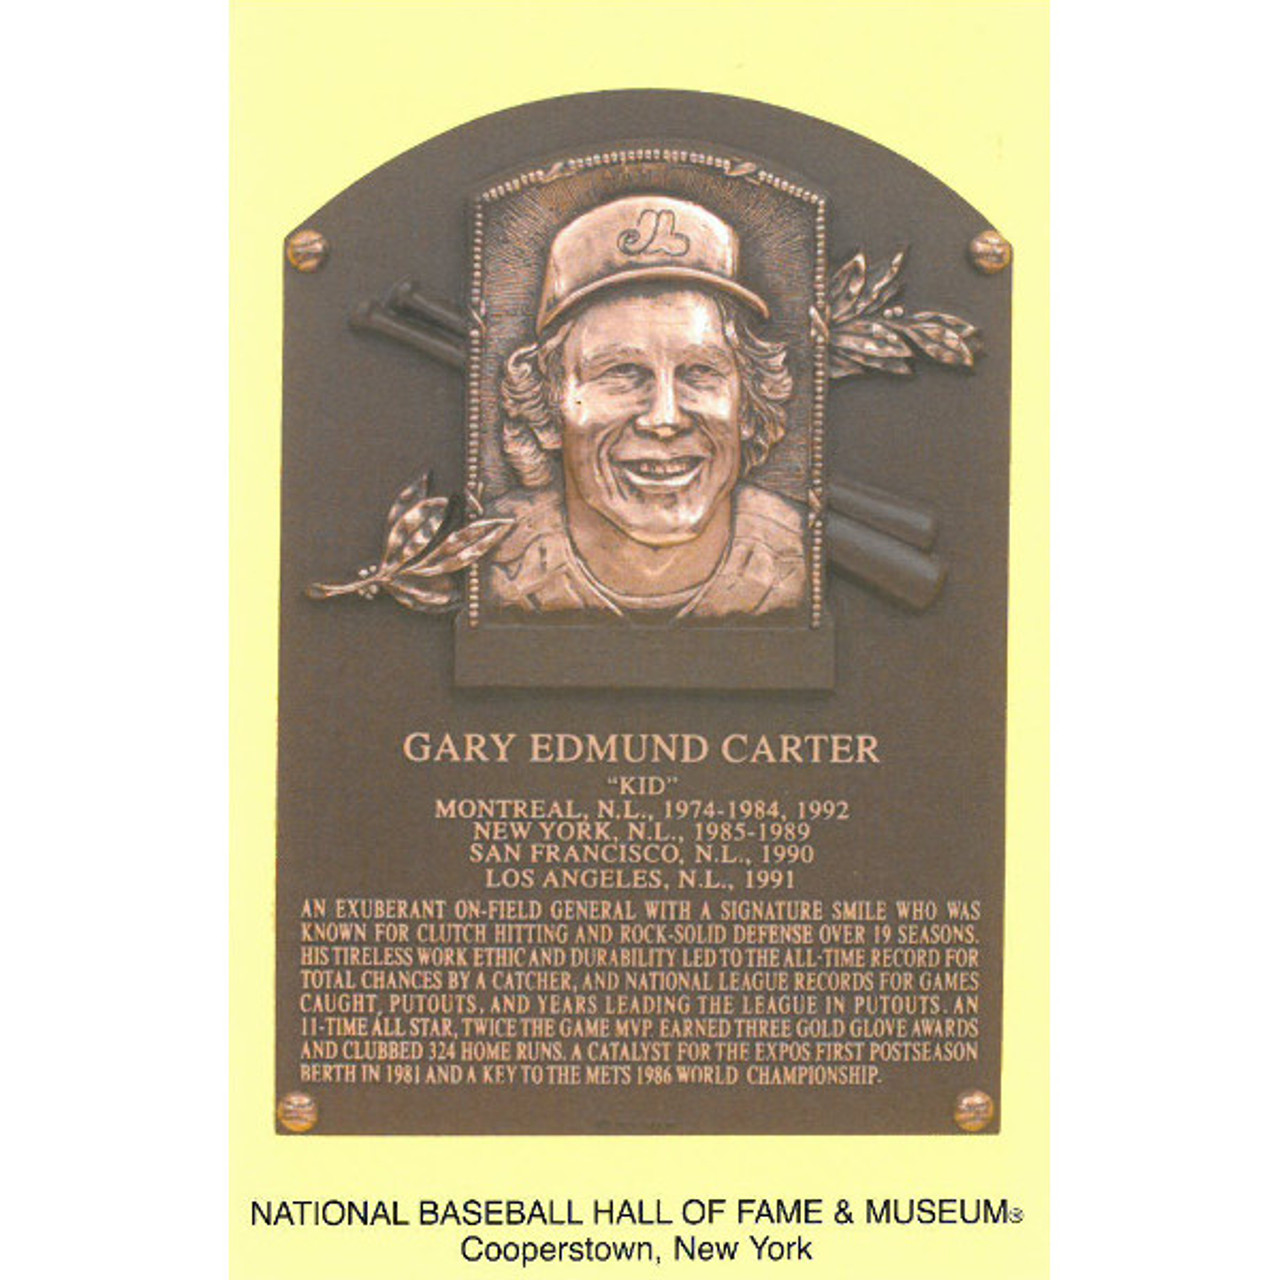 NY Mets pay tribute to Gary Carter, Baseball Hall of Famer and